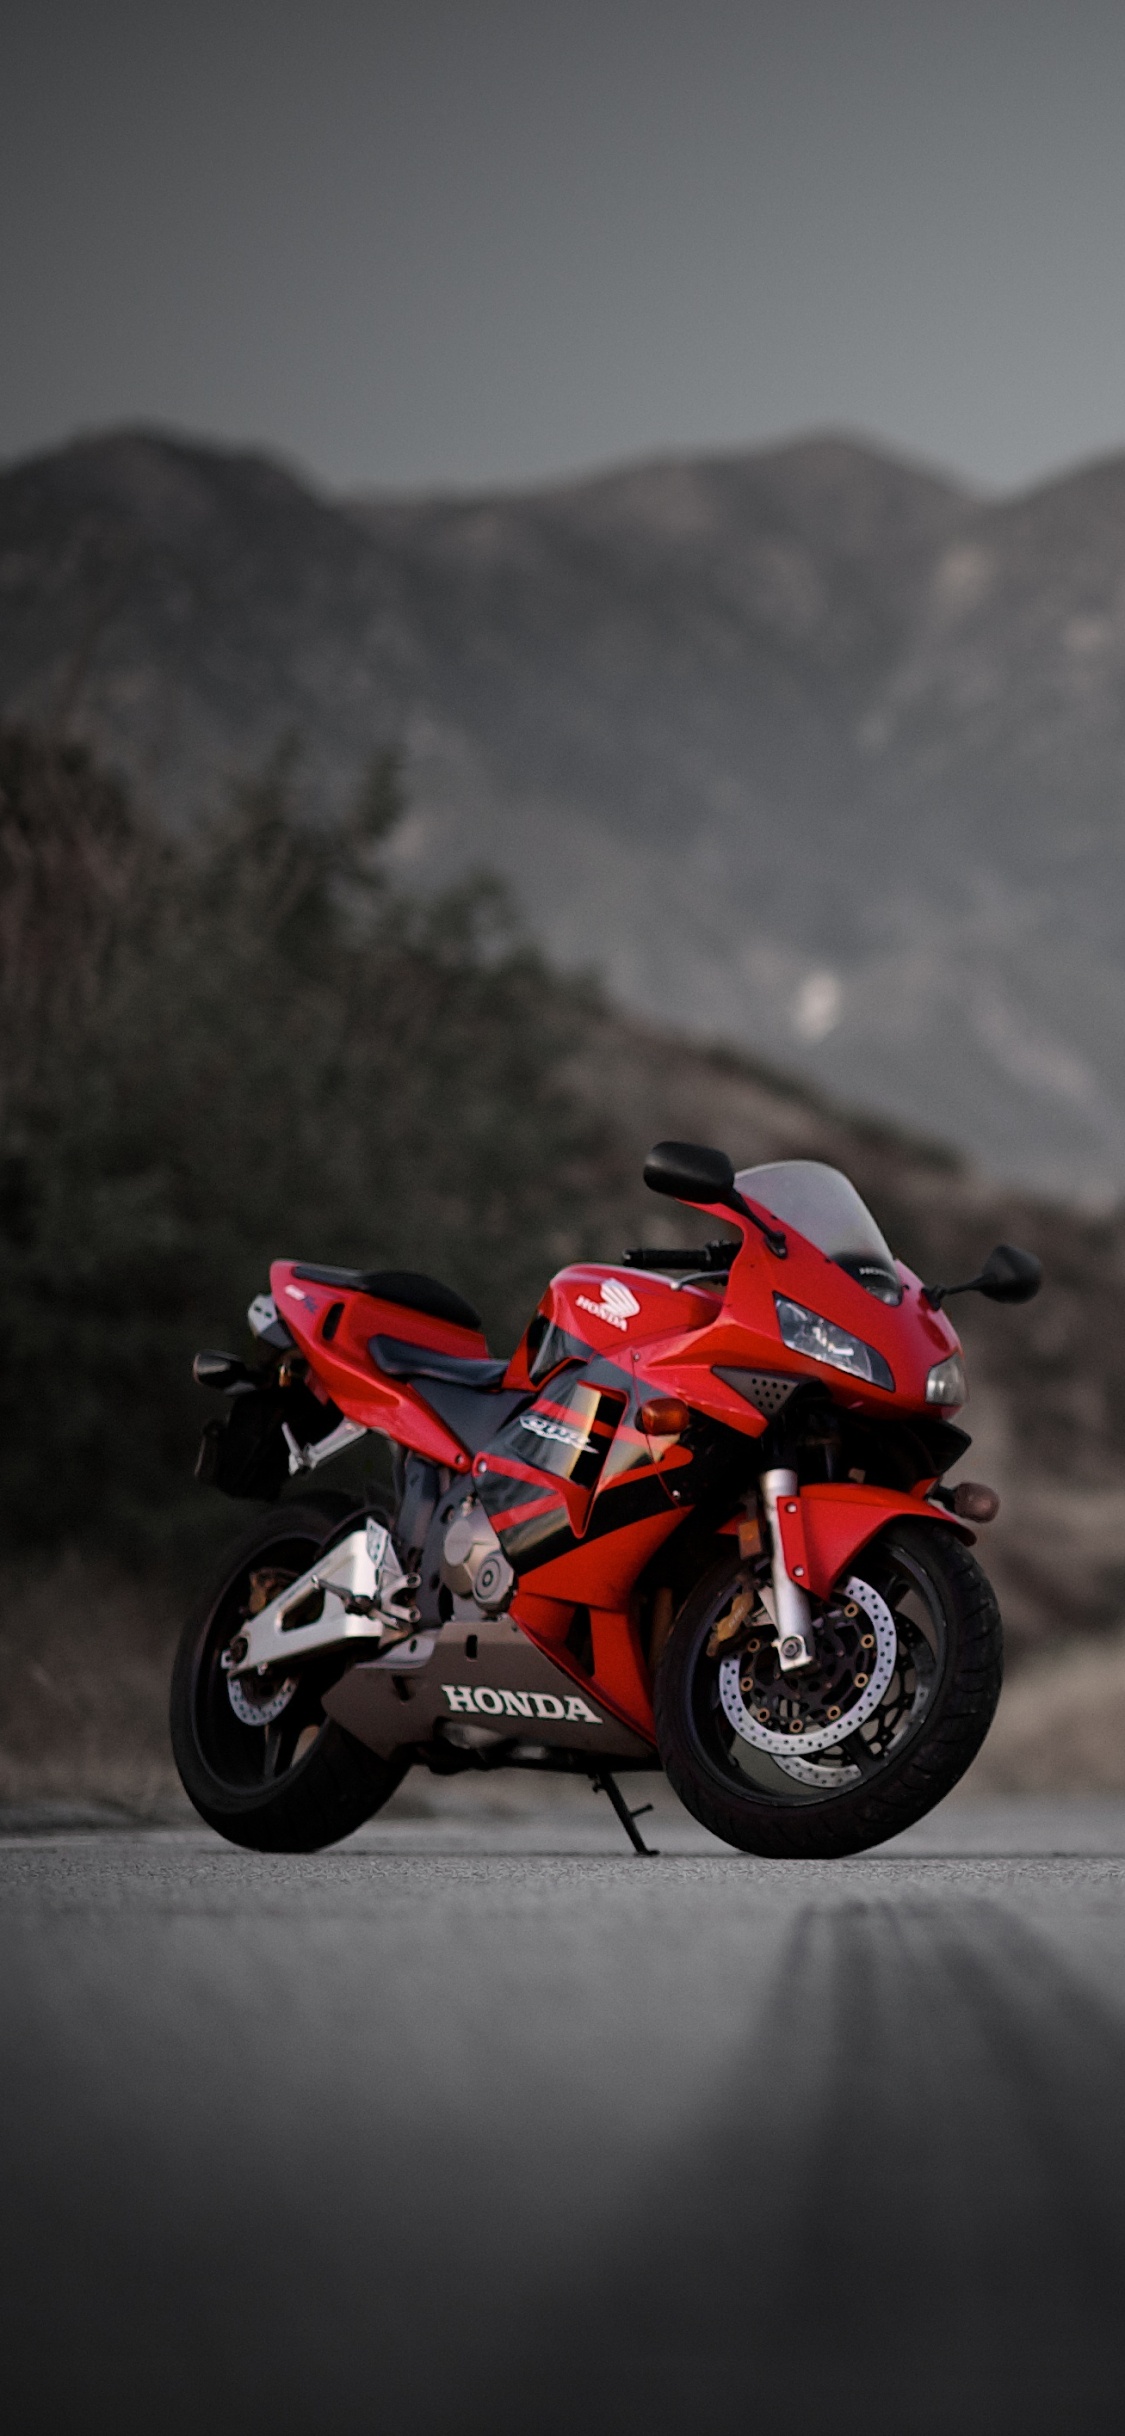 Red and Black Sports Bike on Road During Daytime. Wallpaper in 1125x2436 Resolution